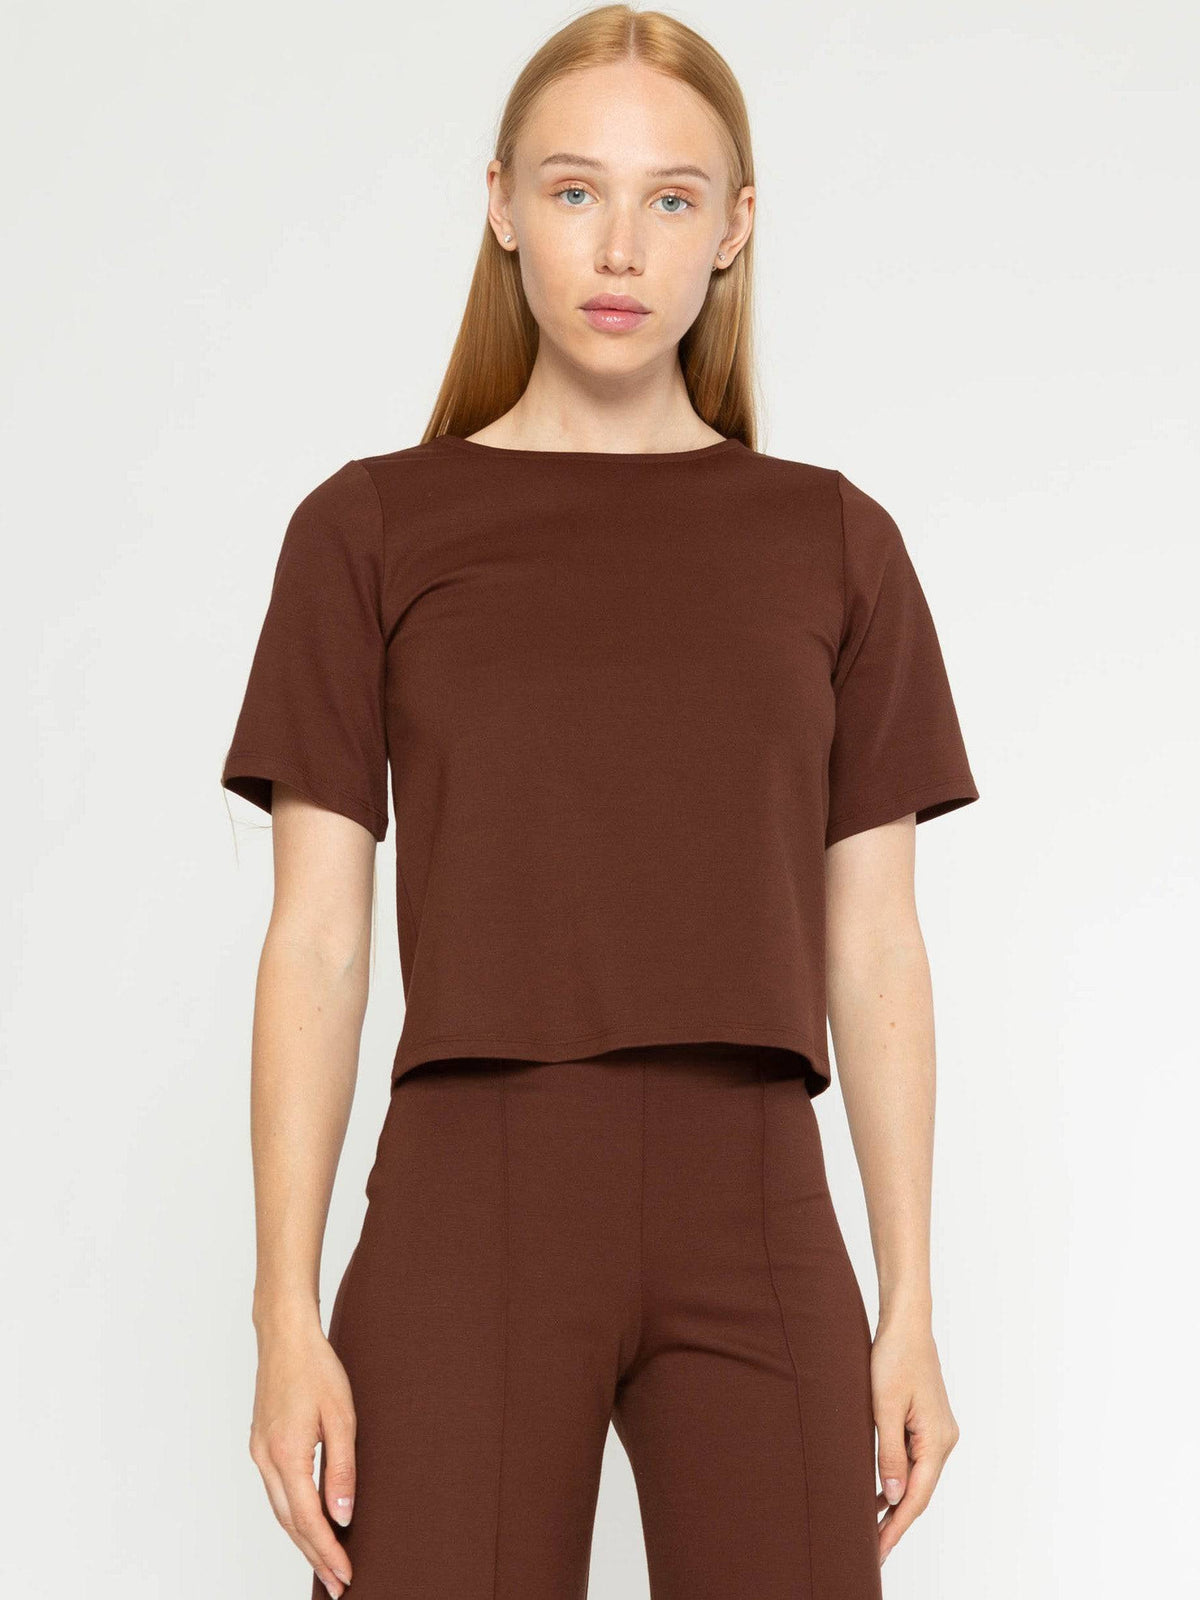 Chocolate Ponte Knit Short Sleeve Top Extended